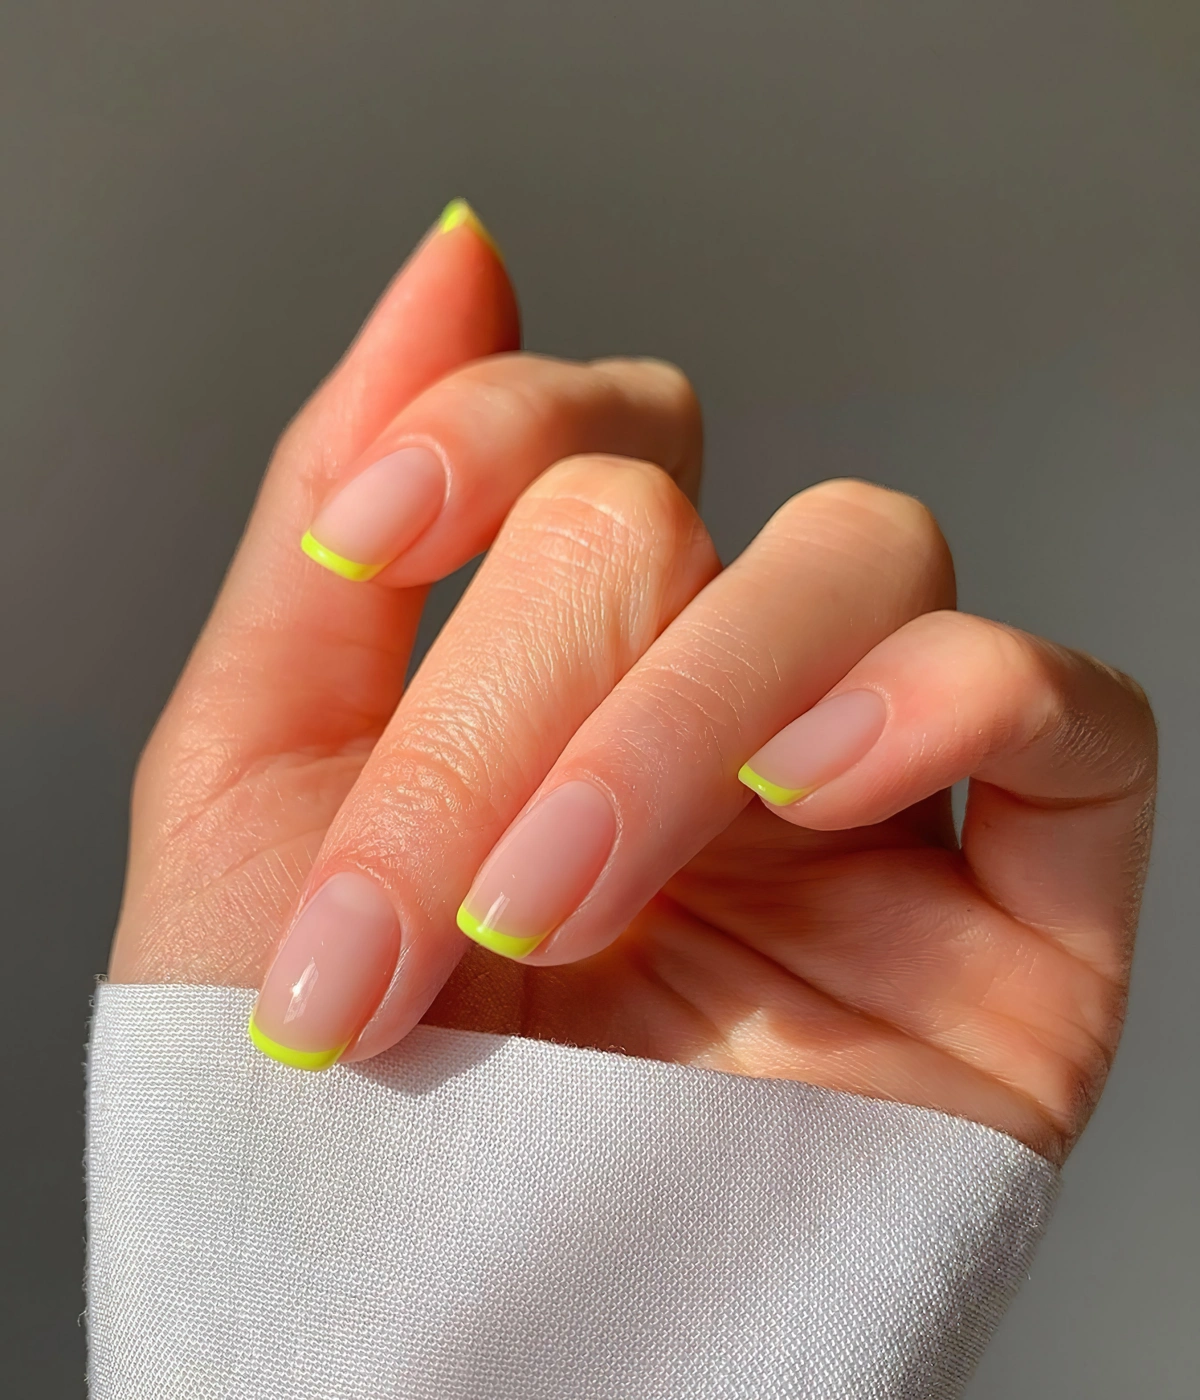 micro nails french pointes fines jaune neon vernis manucure minimaliste